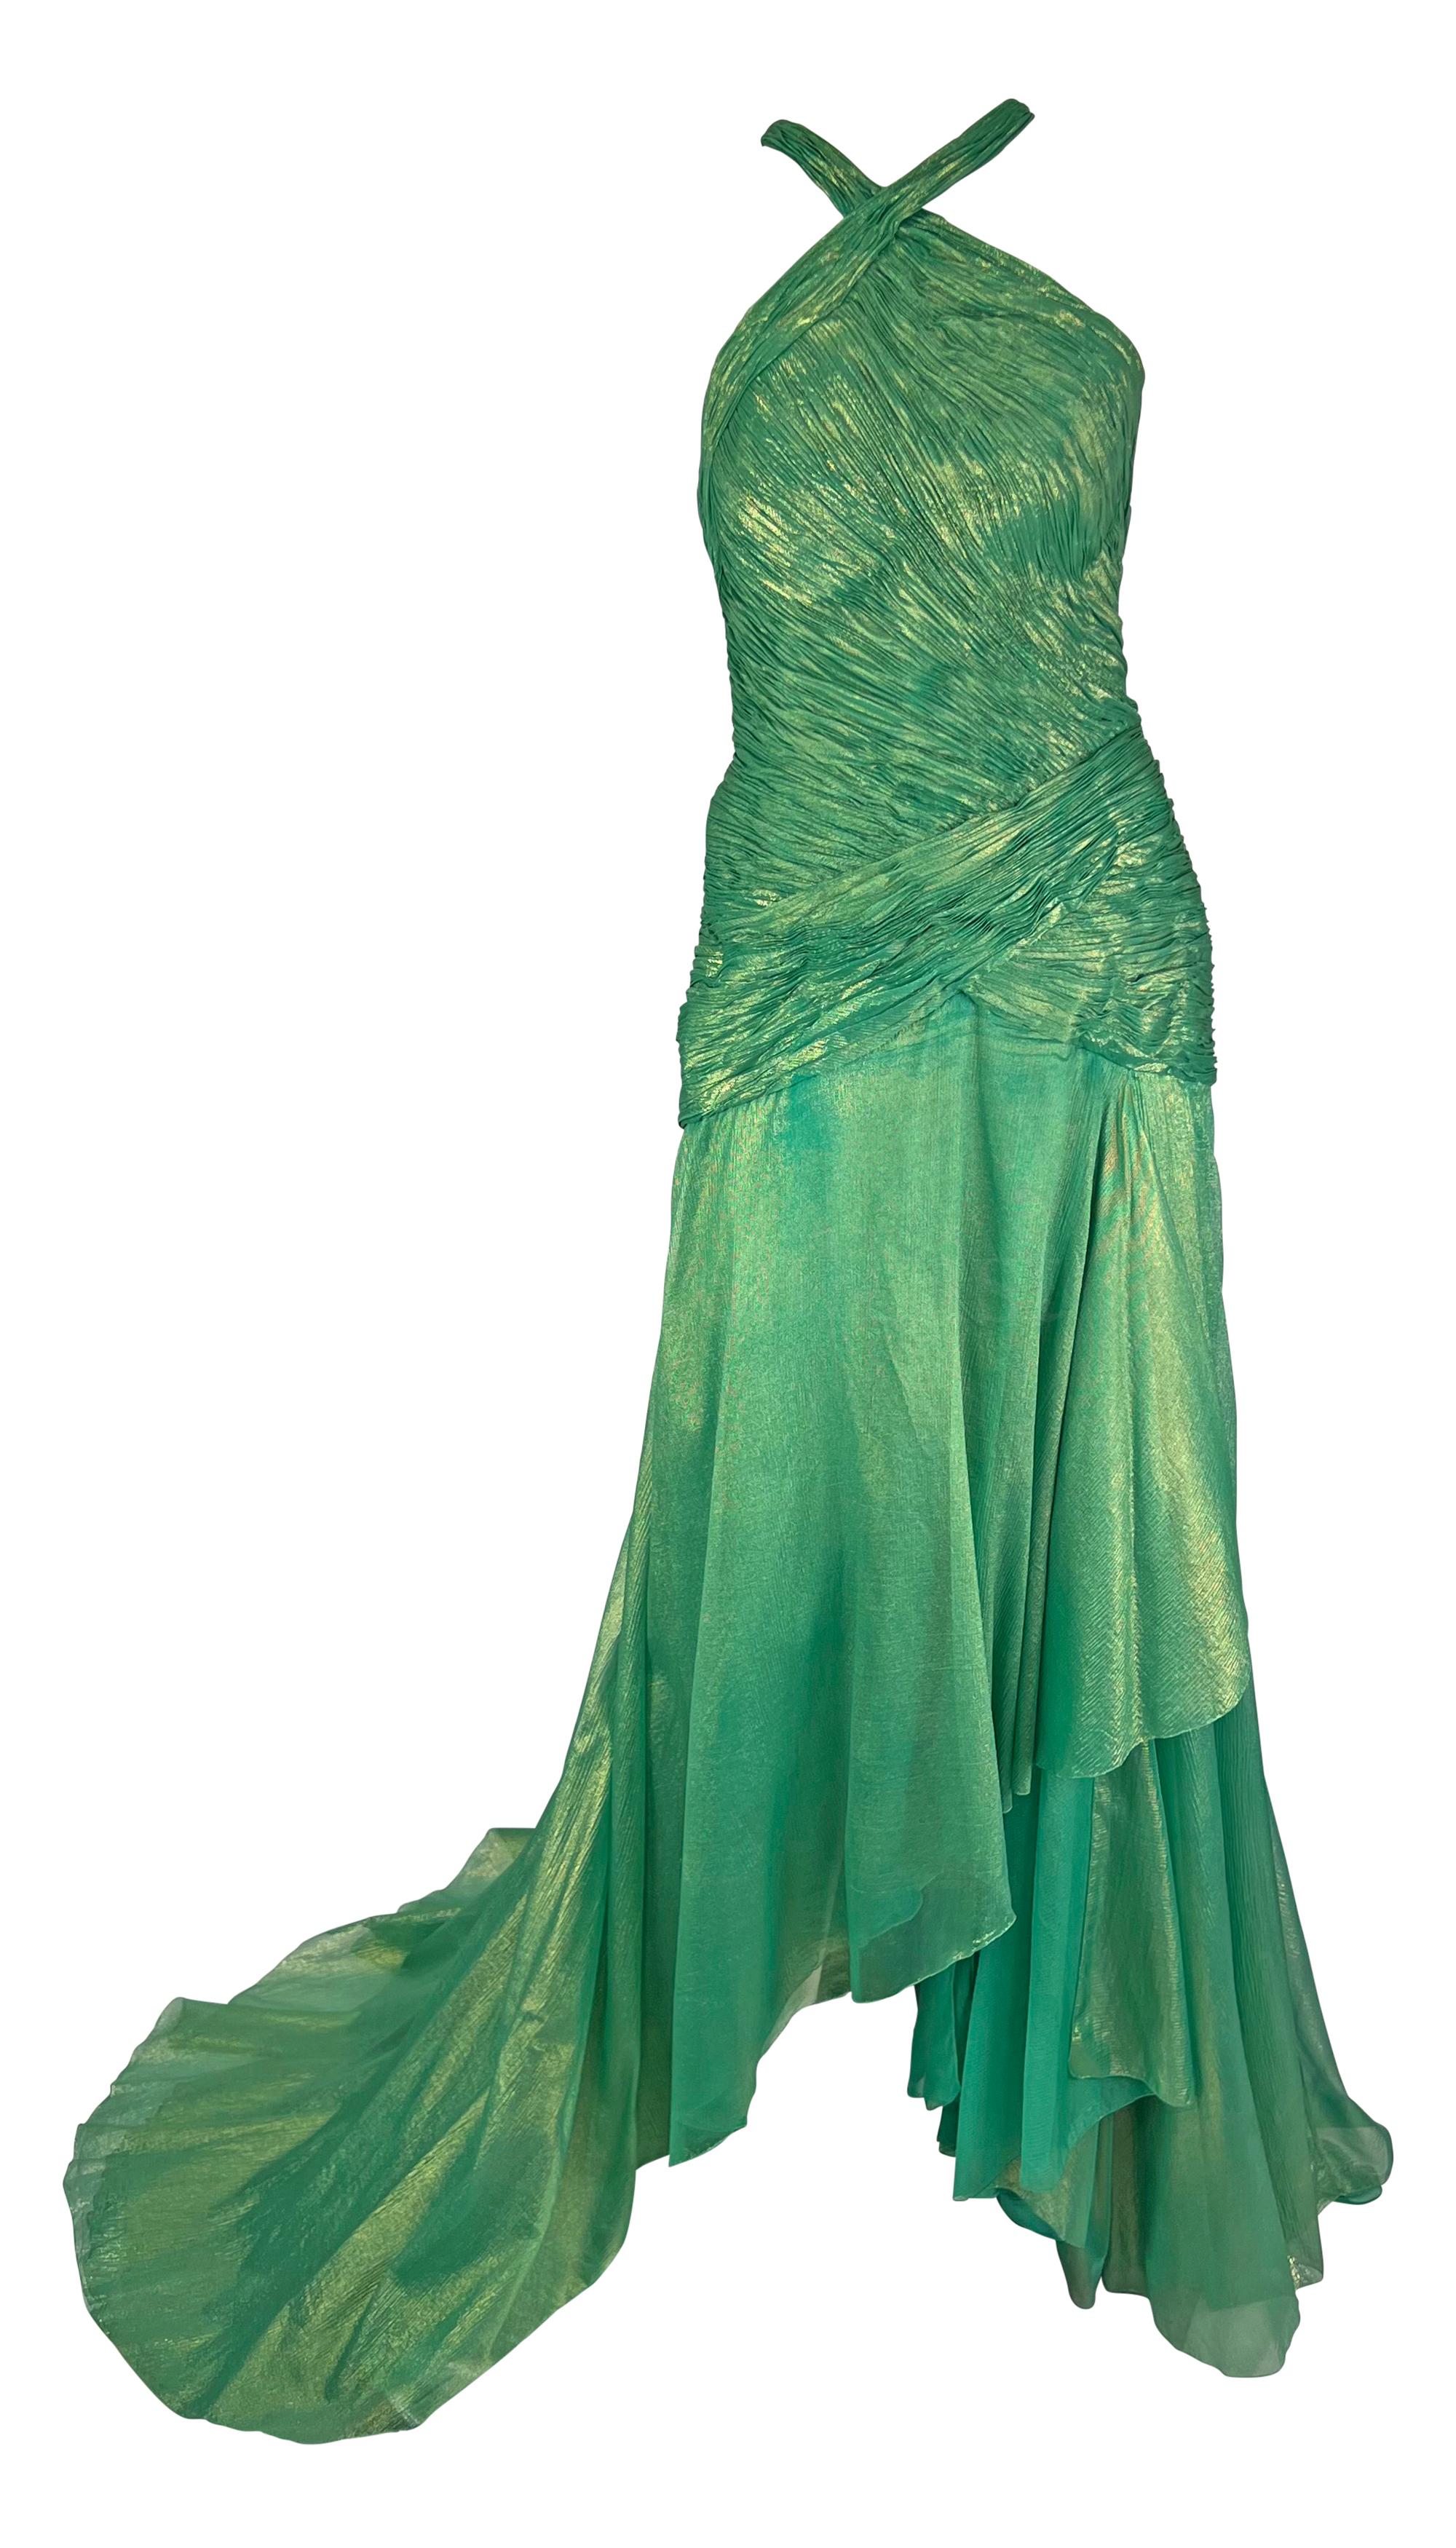 S/S 2004 Atelier Versace by Donatella Metallic Green Halterneck Runway Gown  In Good Condition For Sale In West Hollywood, CA